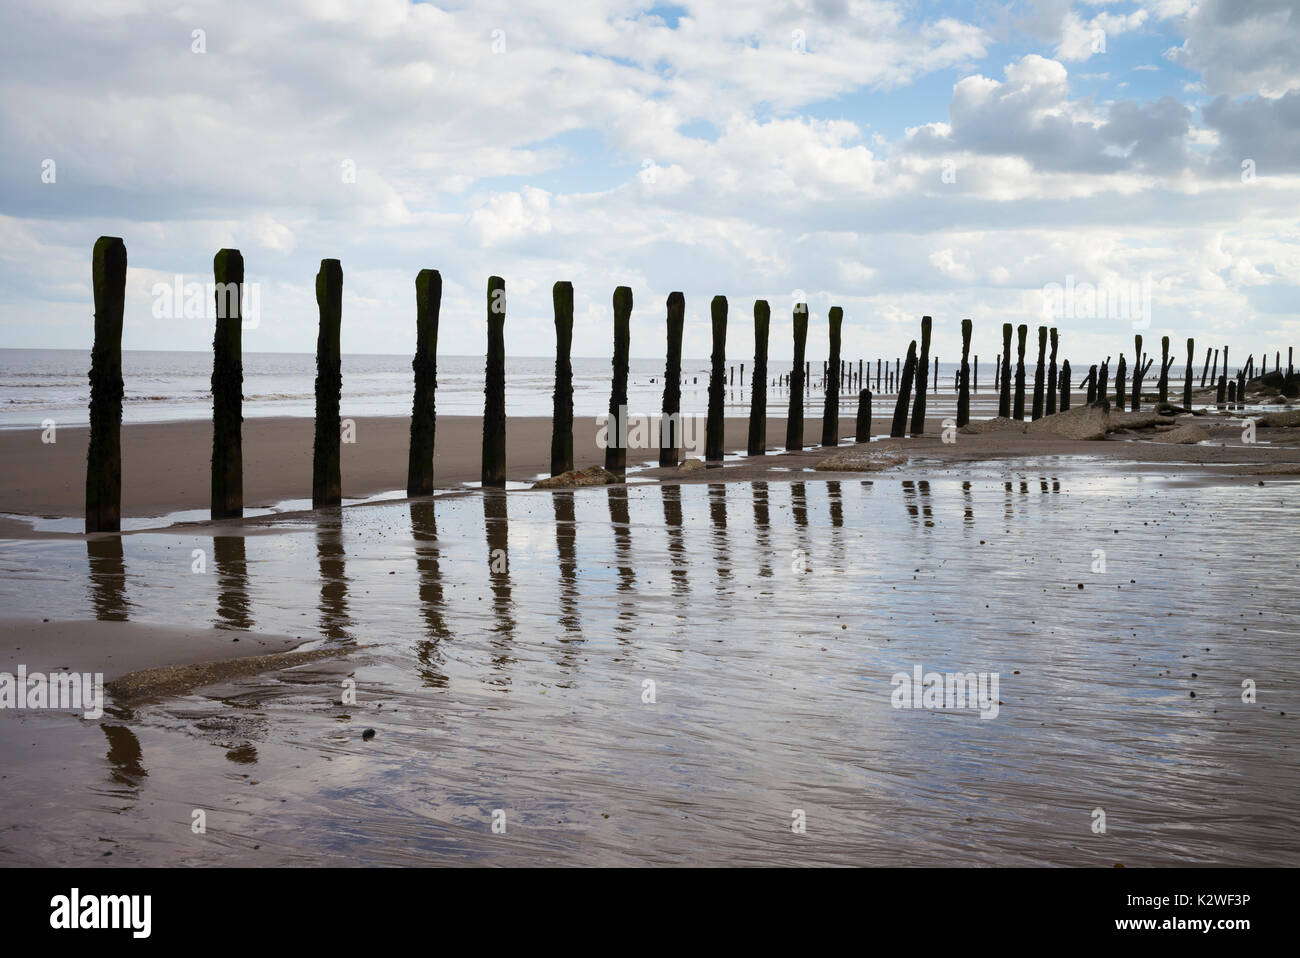 The remains of wooden sea defences on the beach at Spurn Point in Yorkshire. Stock Photo